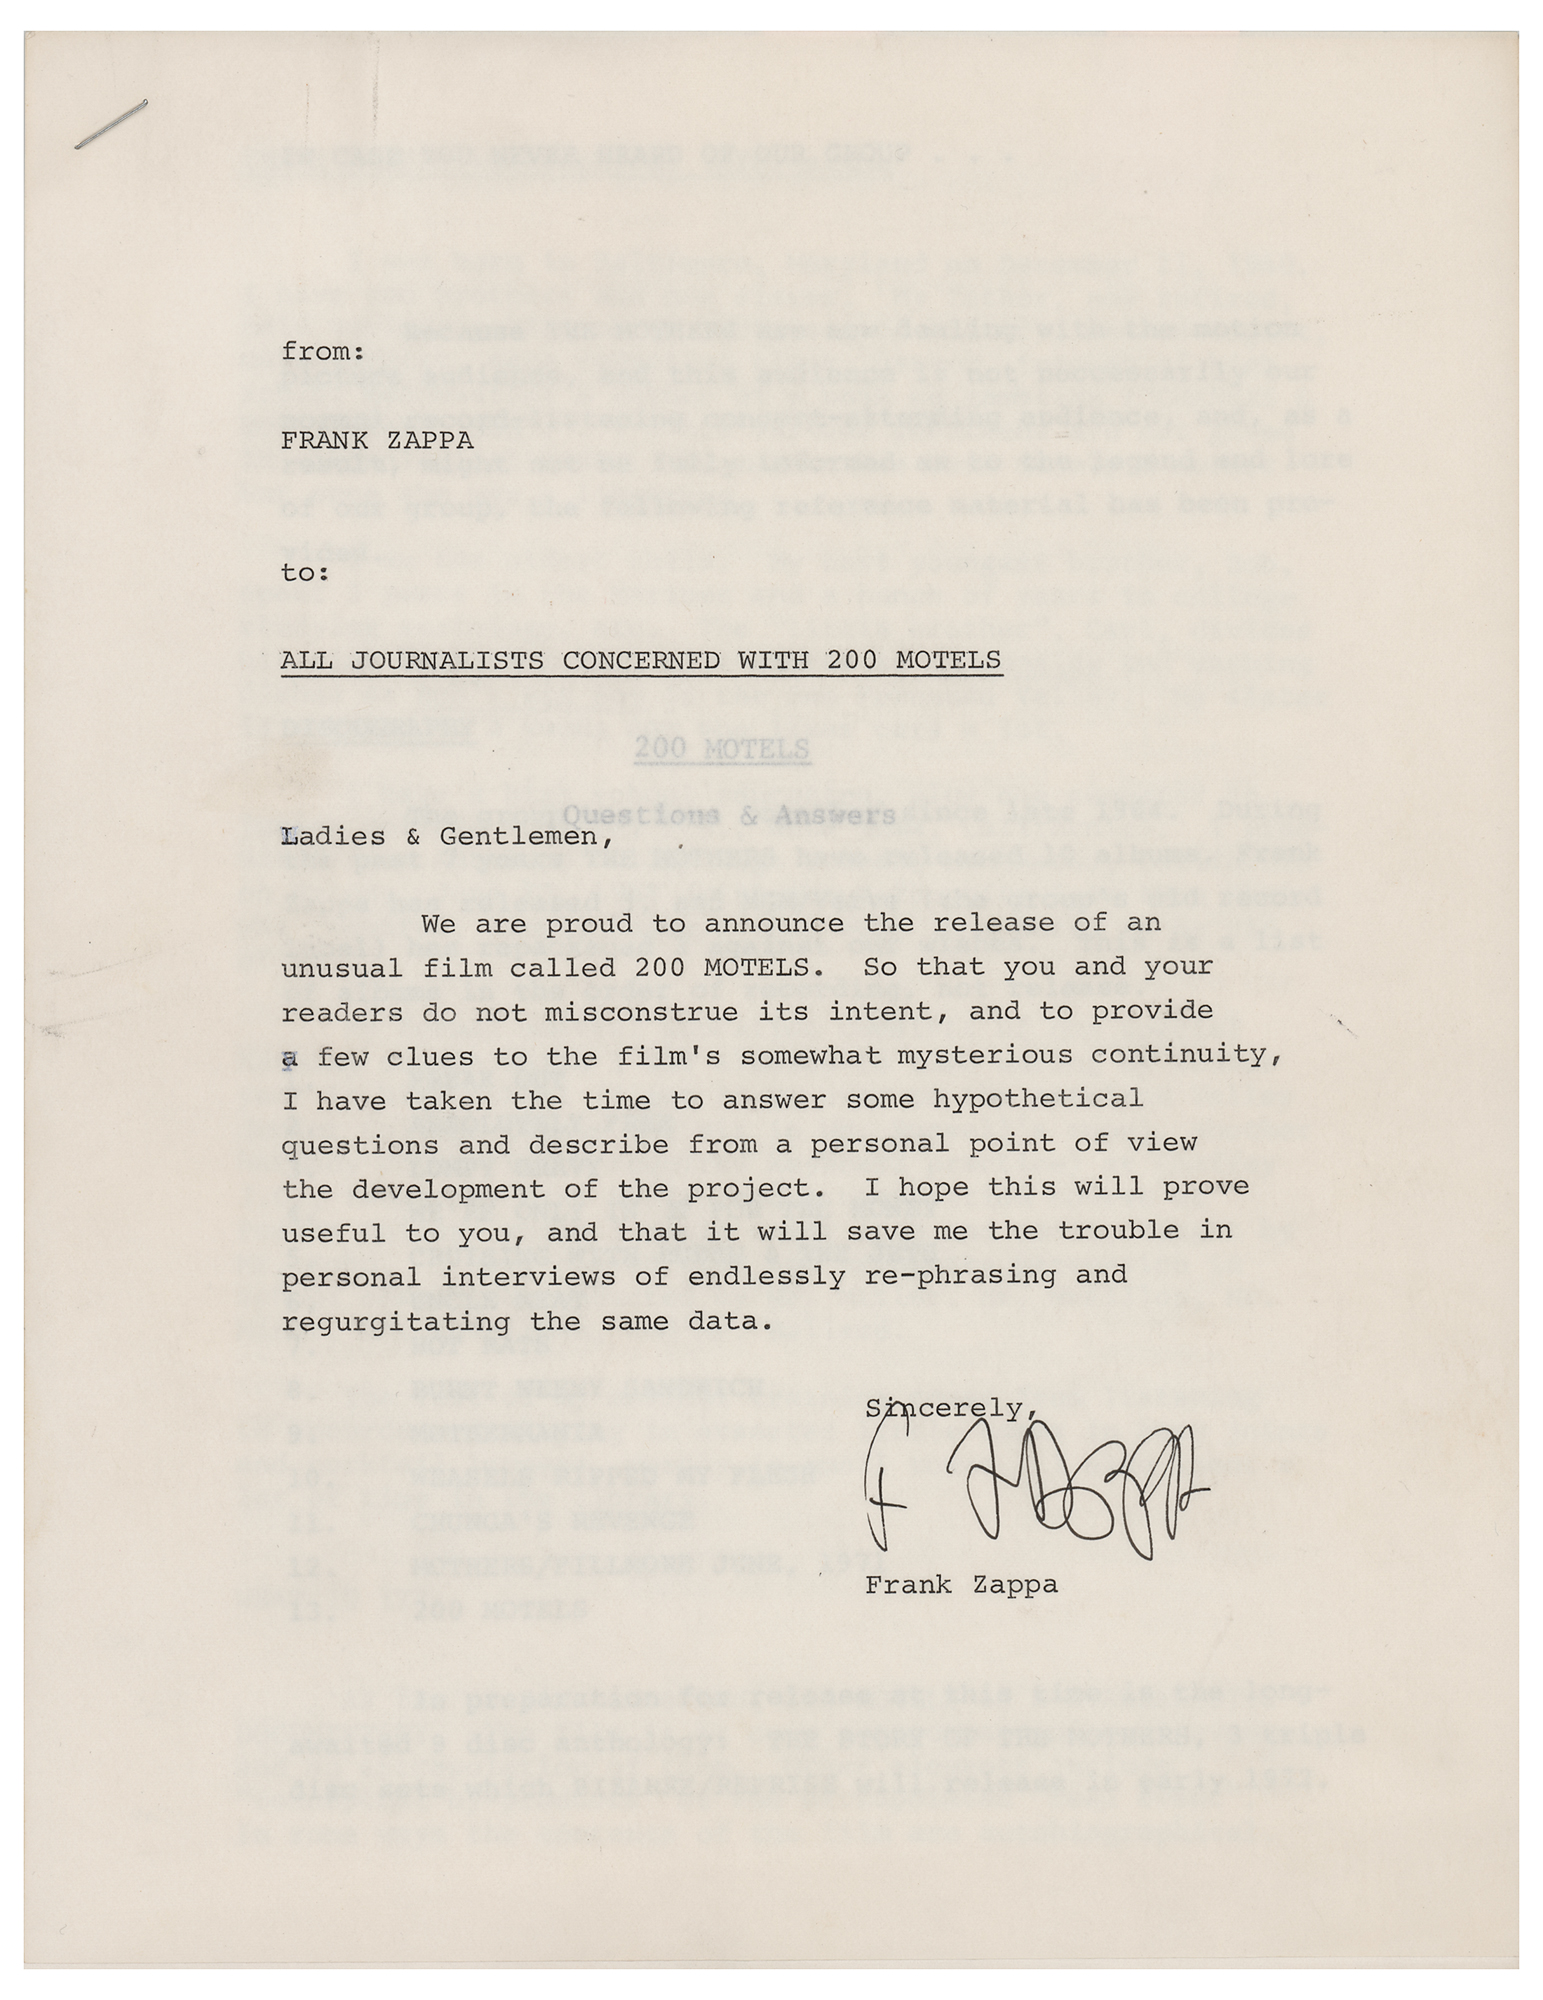 Lot #625 Frank Zappa Signed Cover Letter and Press Release for 200 Motels